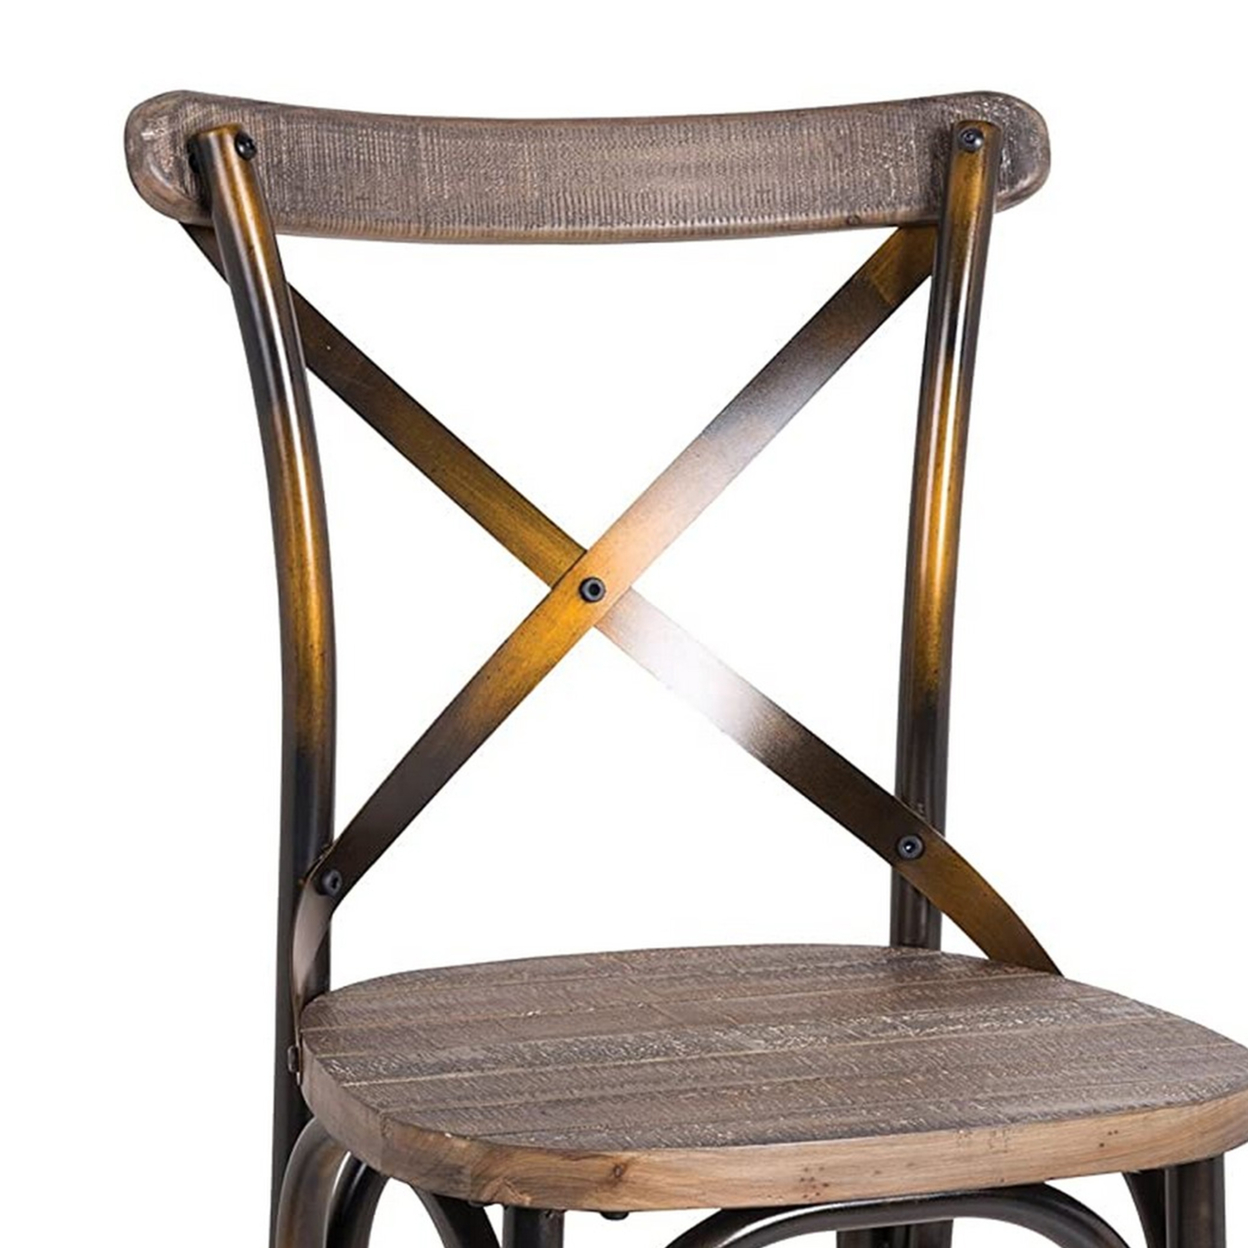 Industrial Dining Chair With Wood, Metal Backrest, Brown, Copper- Saltoro Sherpi